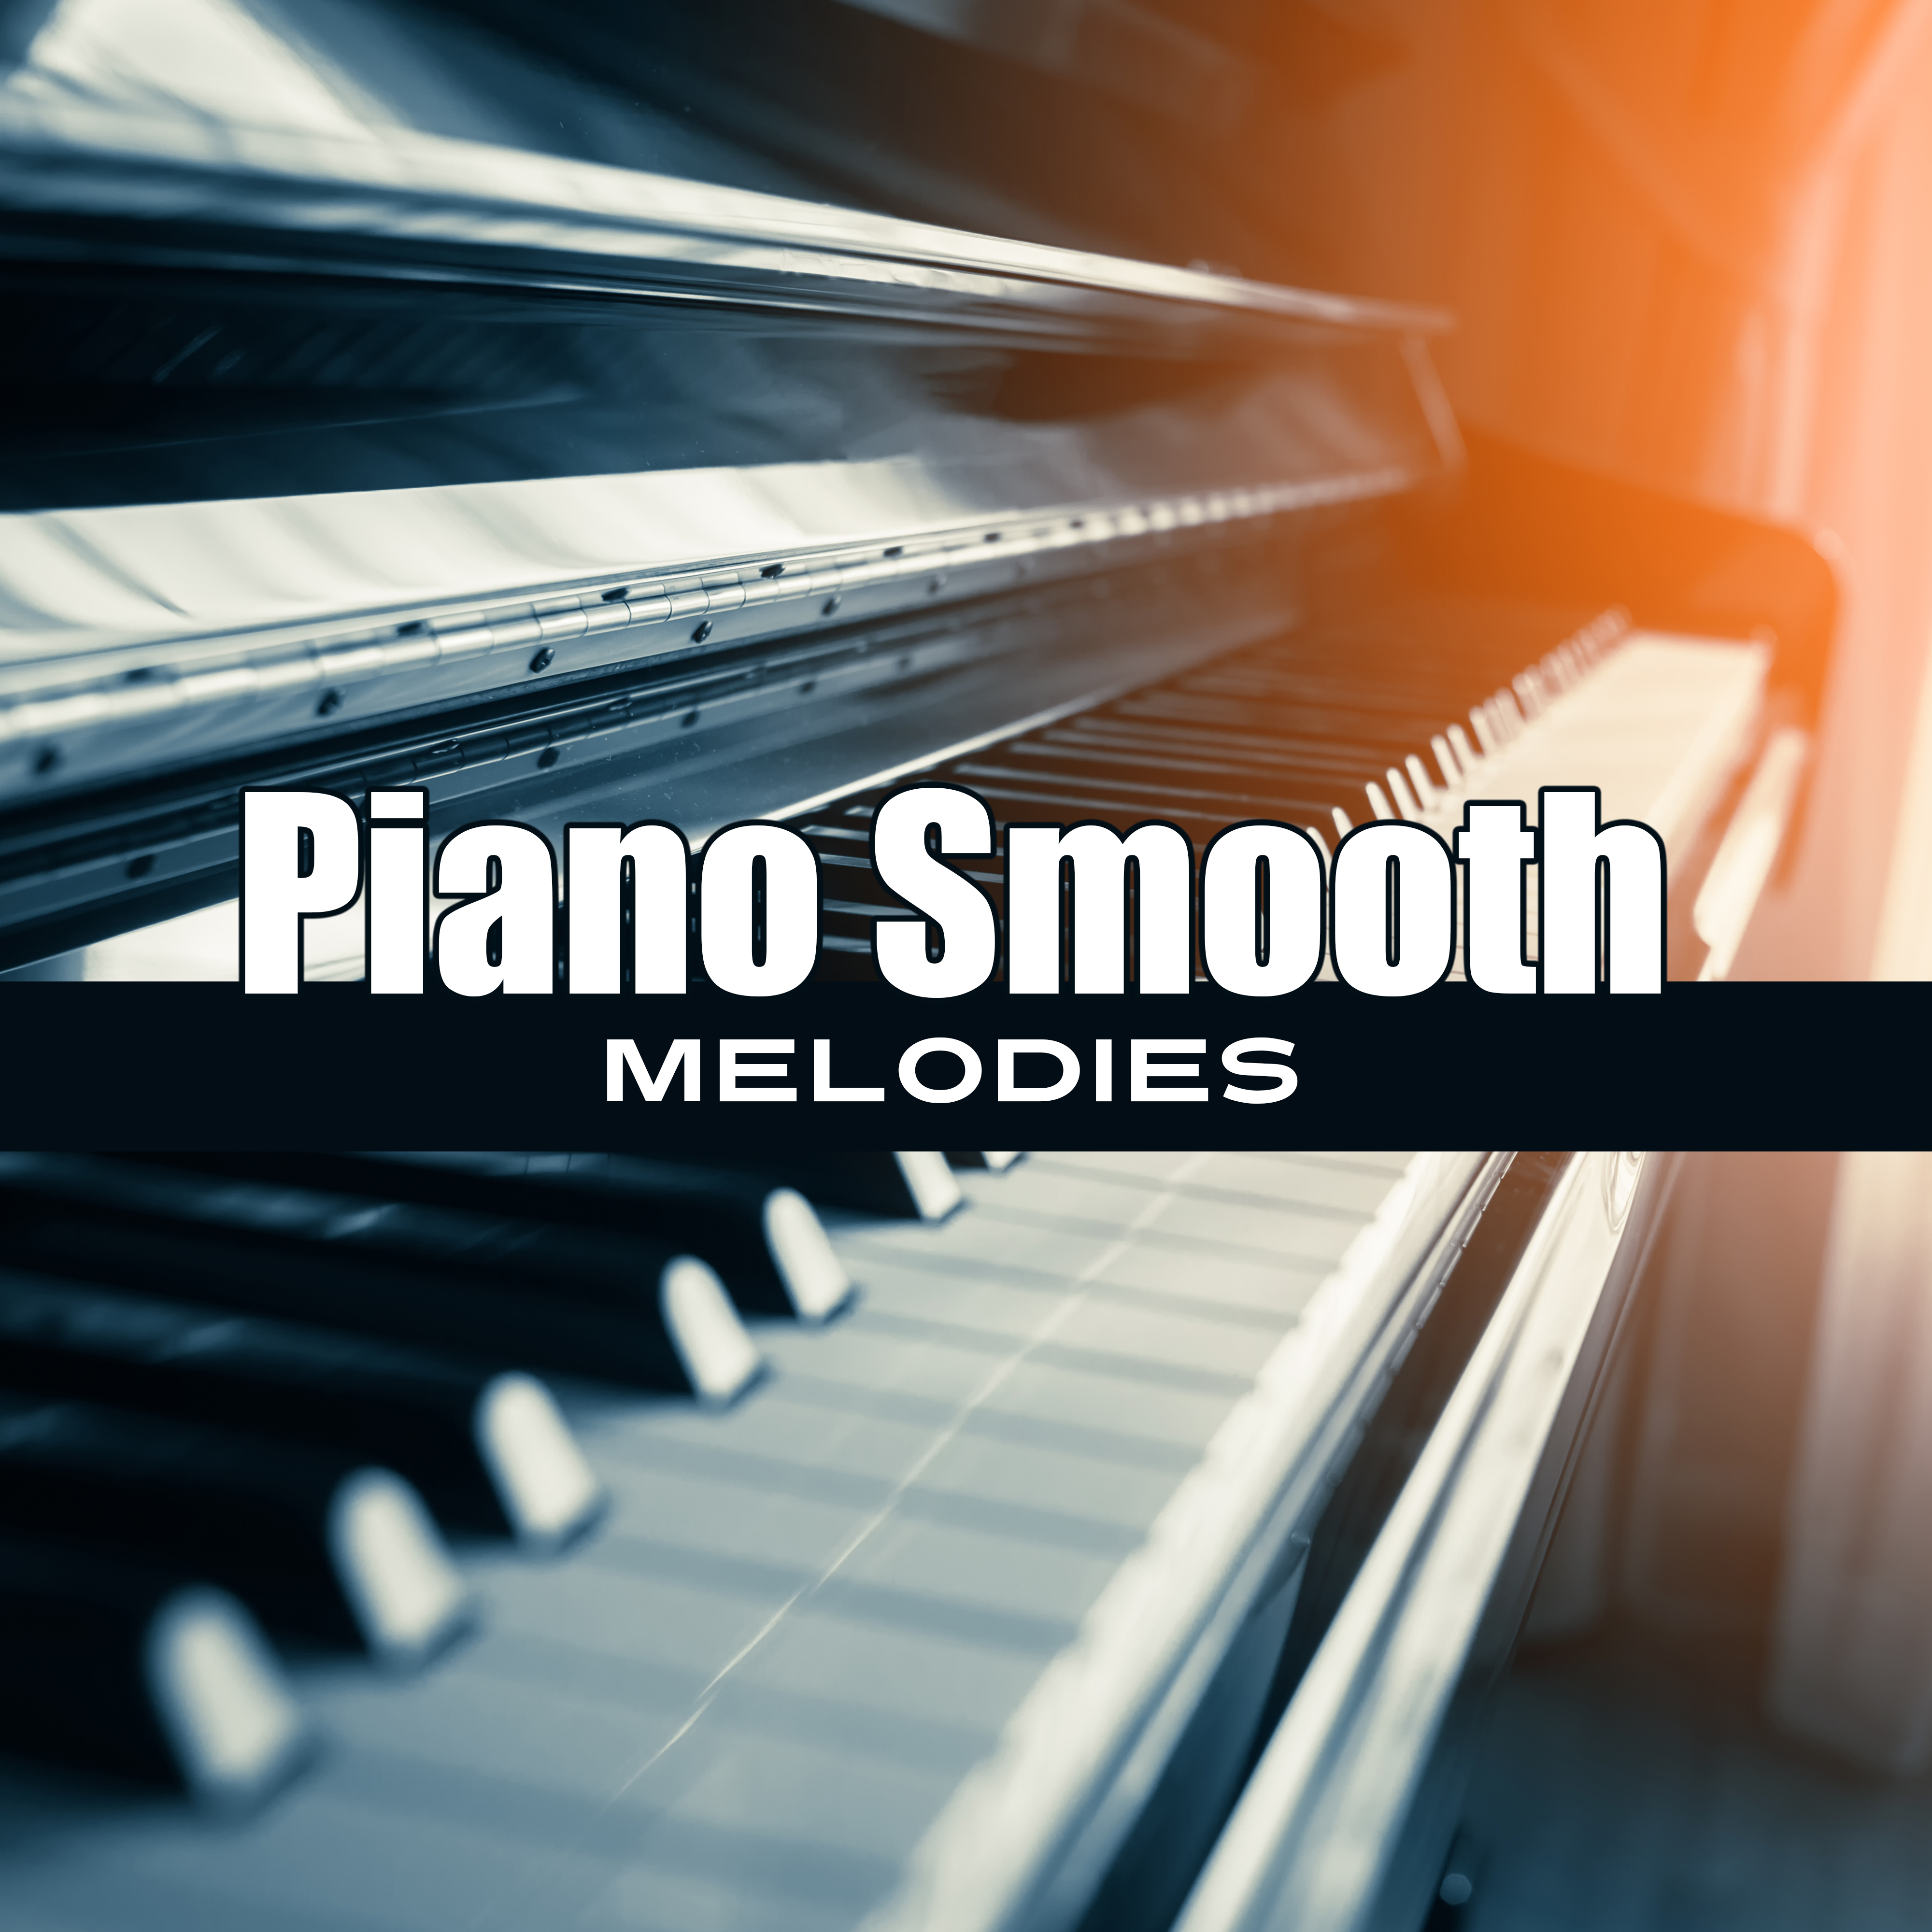 Piano Smooth Melodies